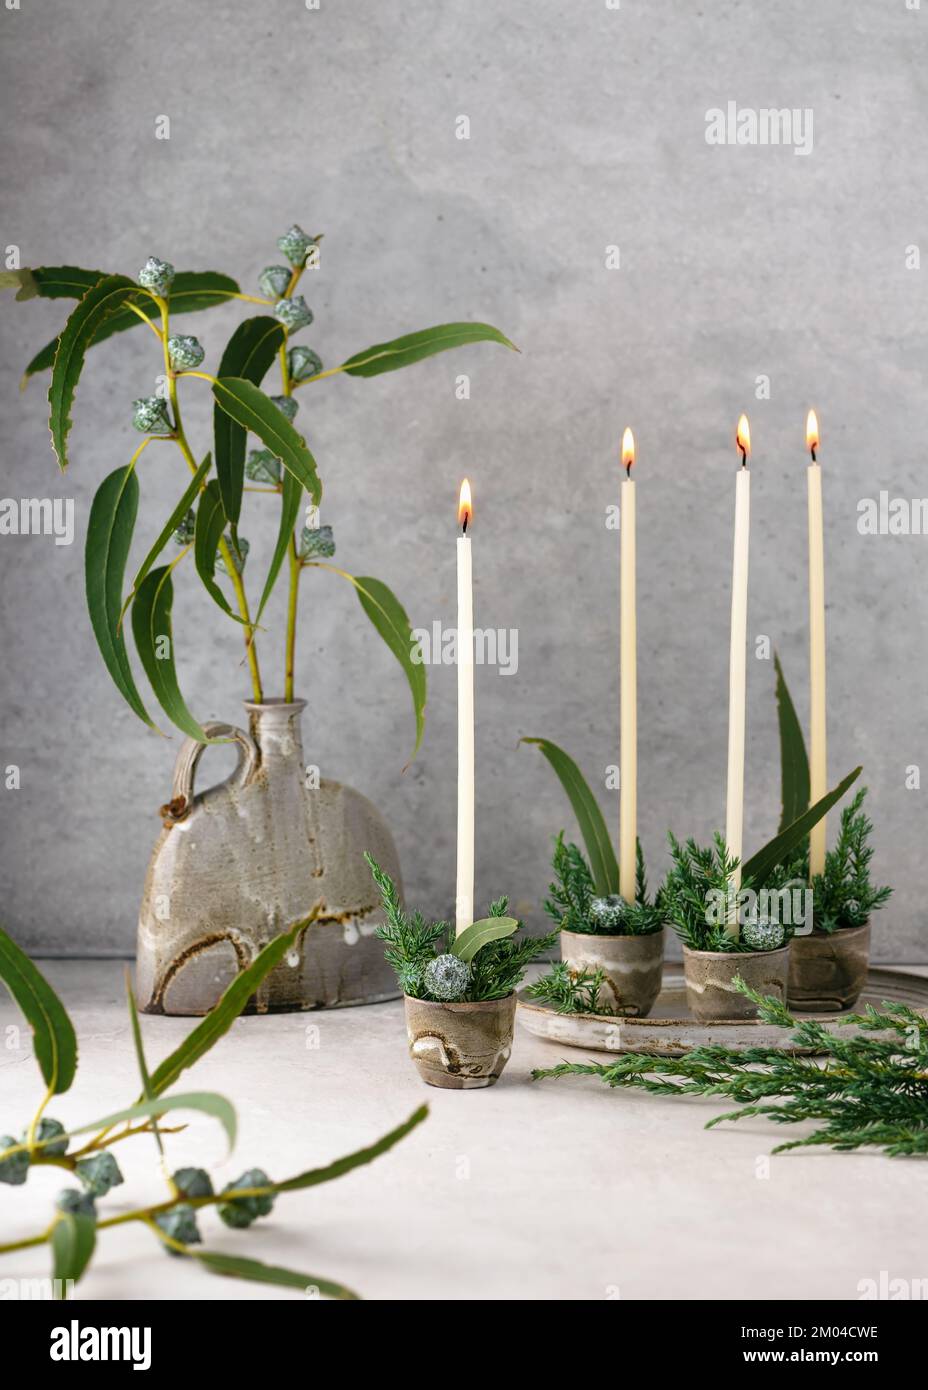 Beautiful winter floristic arrangement with white narrow candles, eucalyptus leaves and fruits in four ceramic mugs. Handmade Christmas home decor Stock Photo